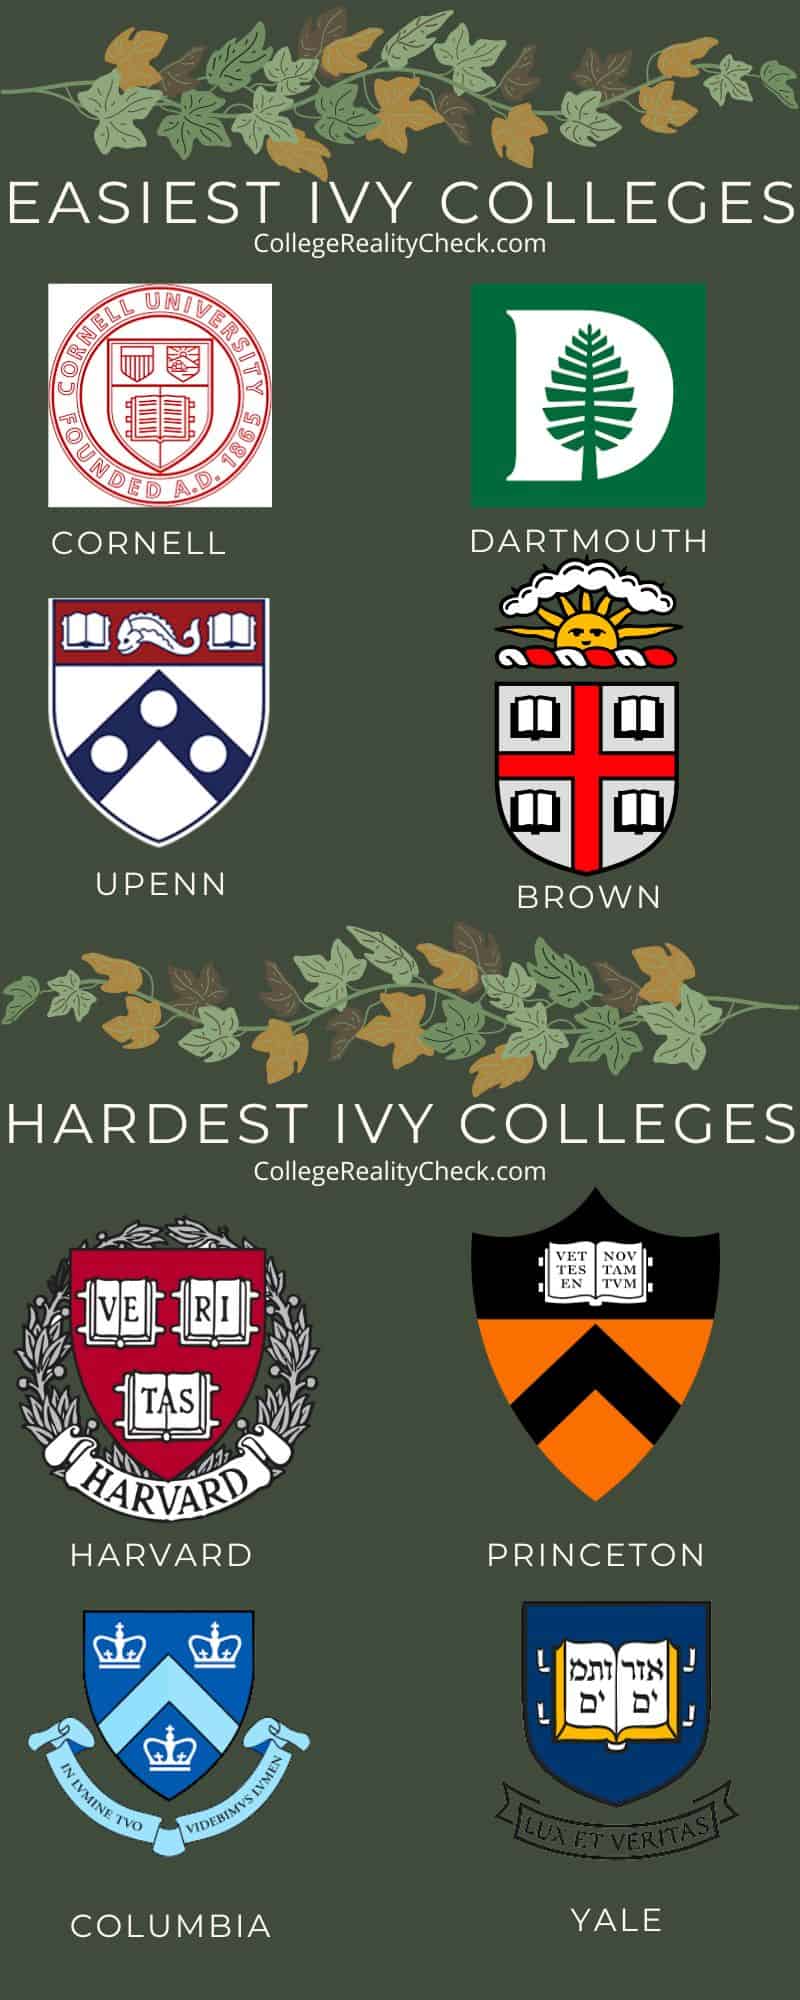 Which Ivy is the hardest?